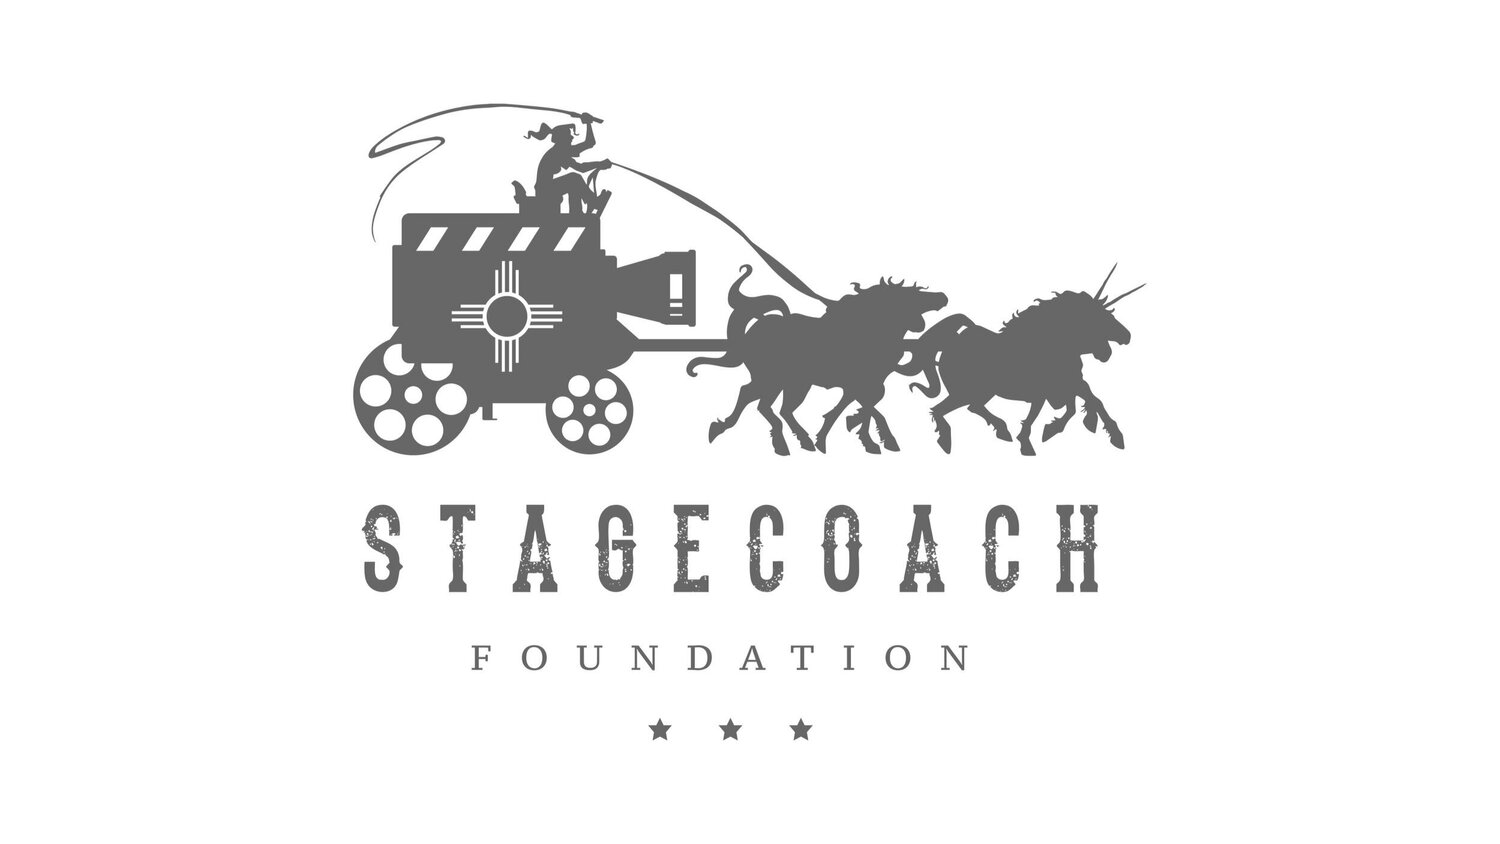 George R.R. Martin’s Stagecoach Foundation Fundraiser Launches at WonderCon